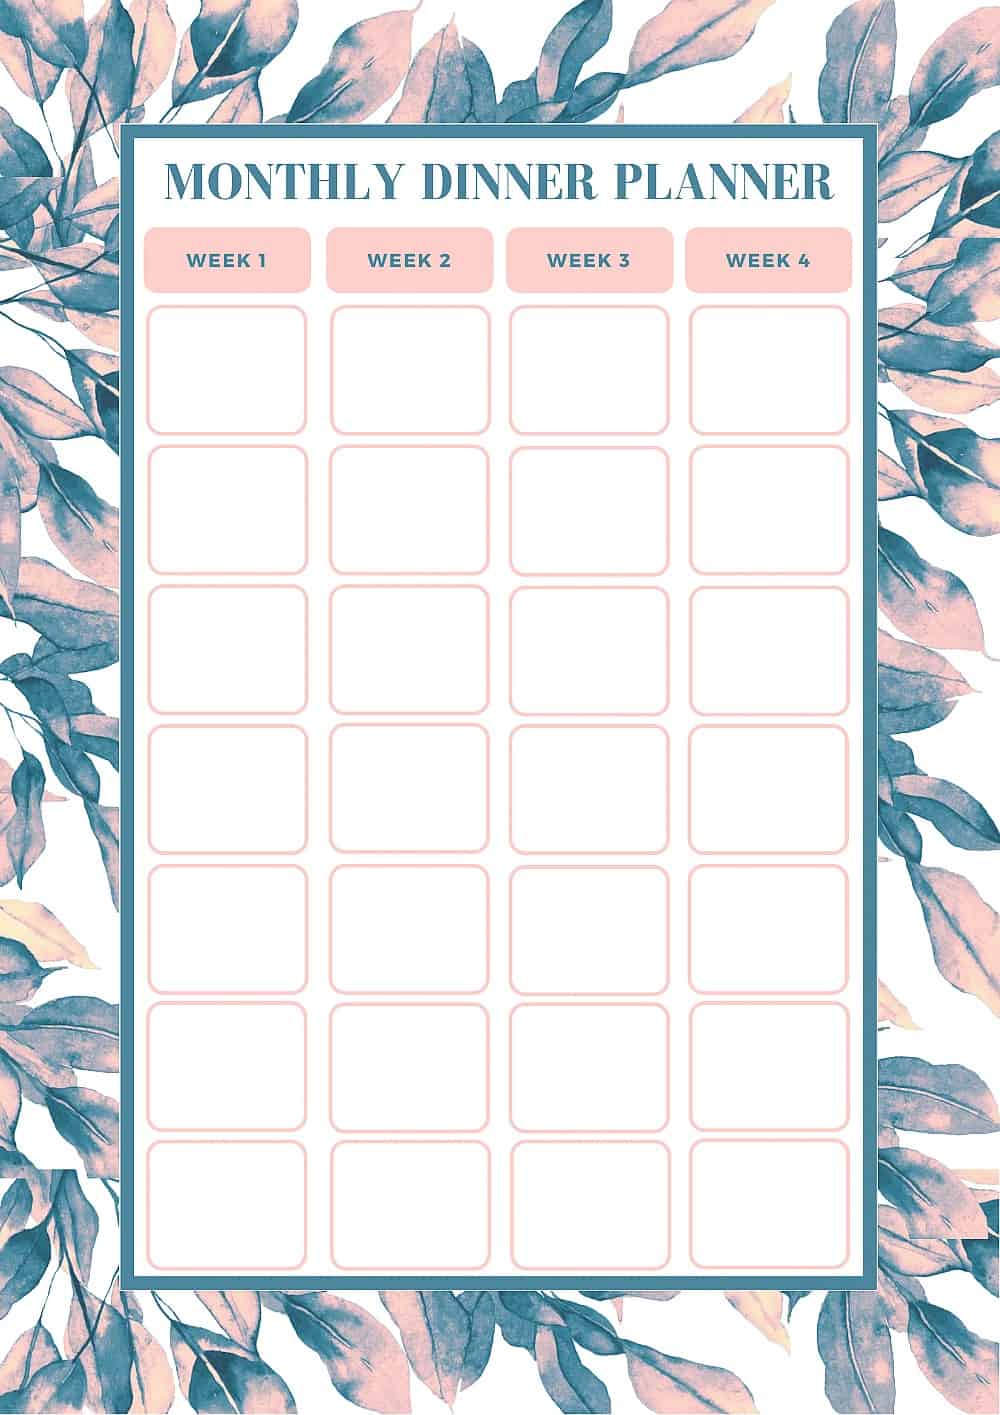 free-monthly-meal-planning-template-bake-play-smile